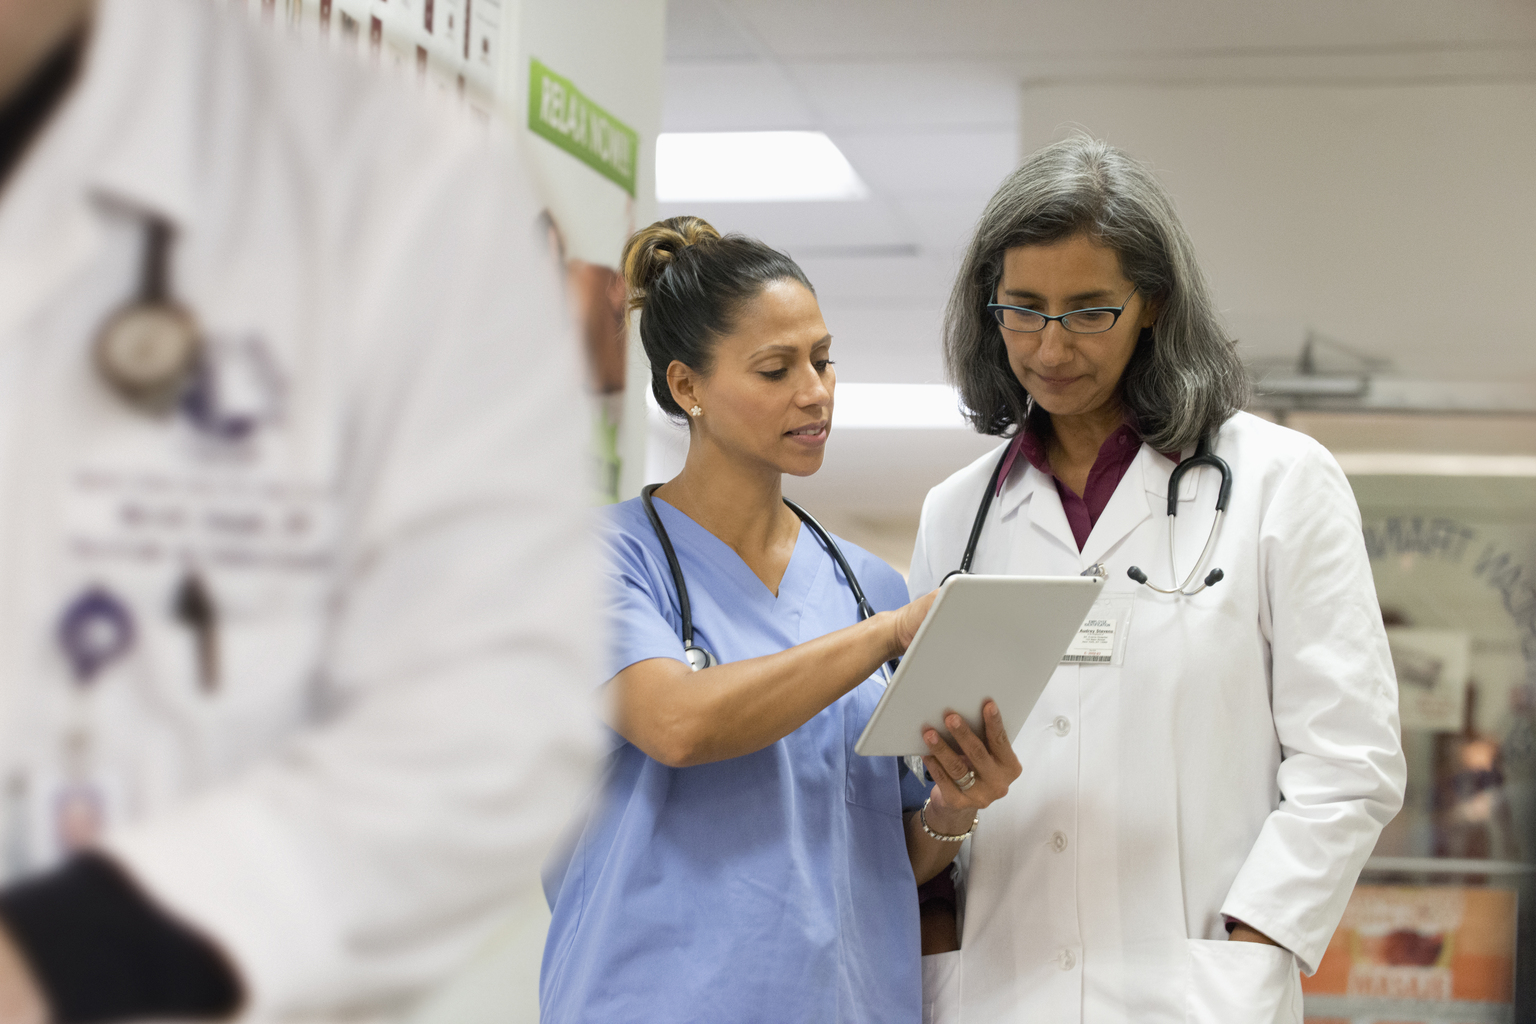 How integrated clinical technology can help address physician burnout